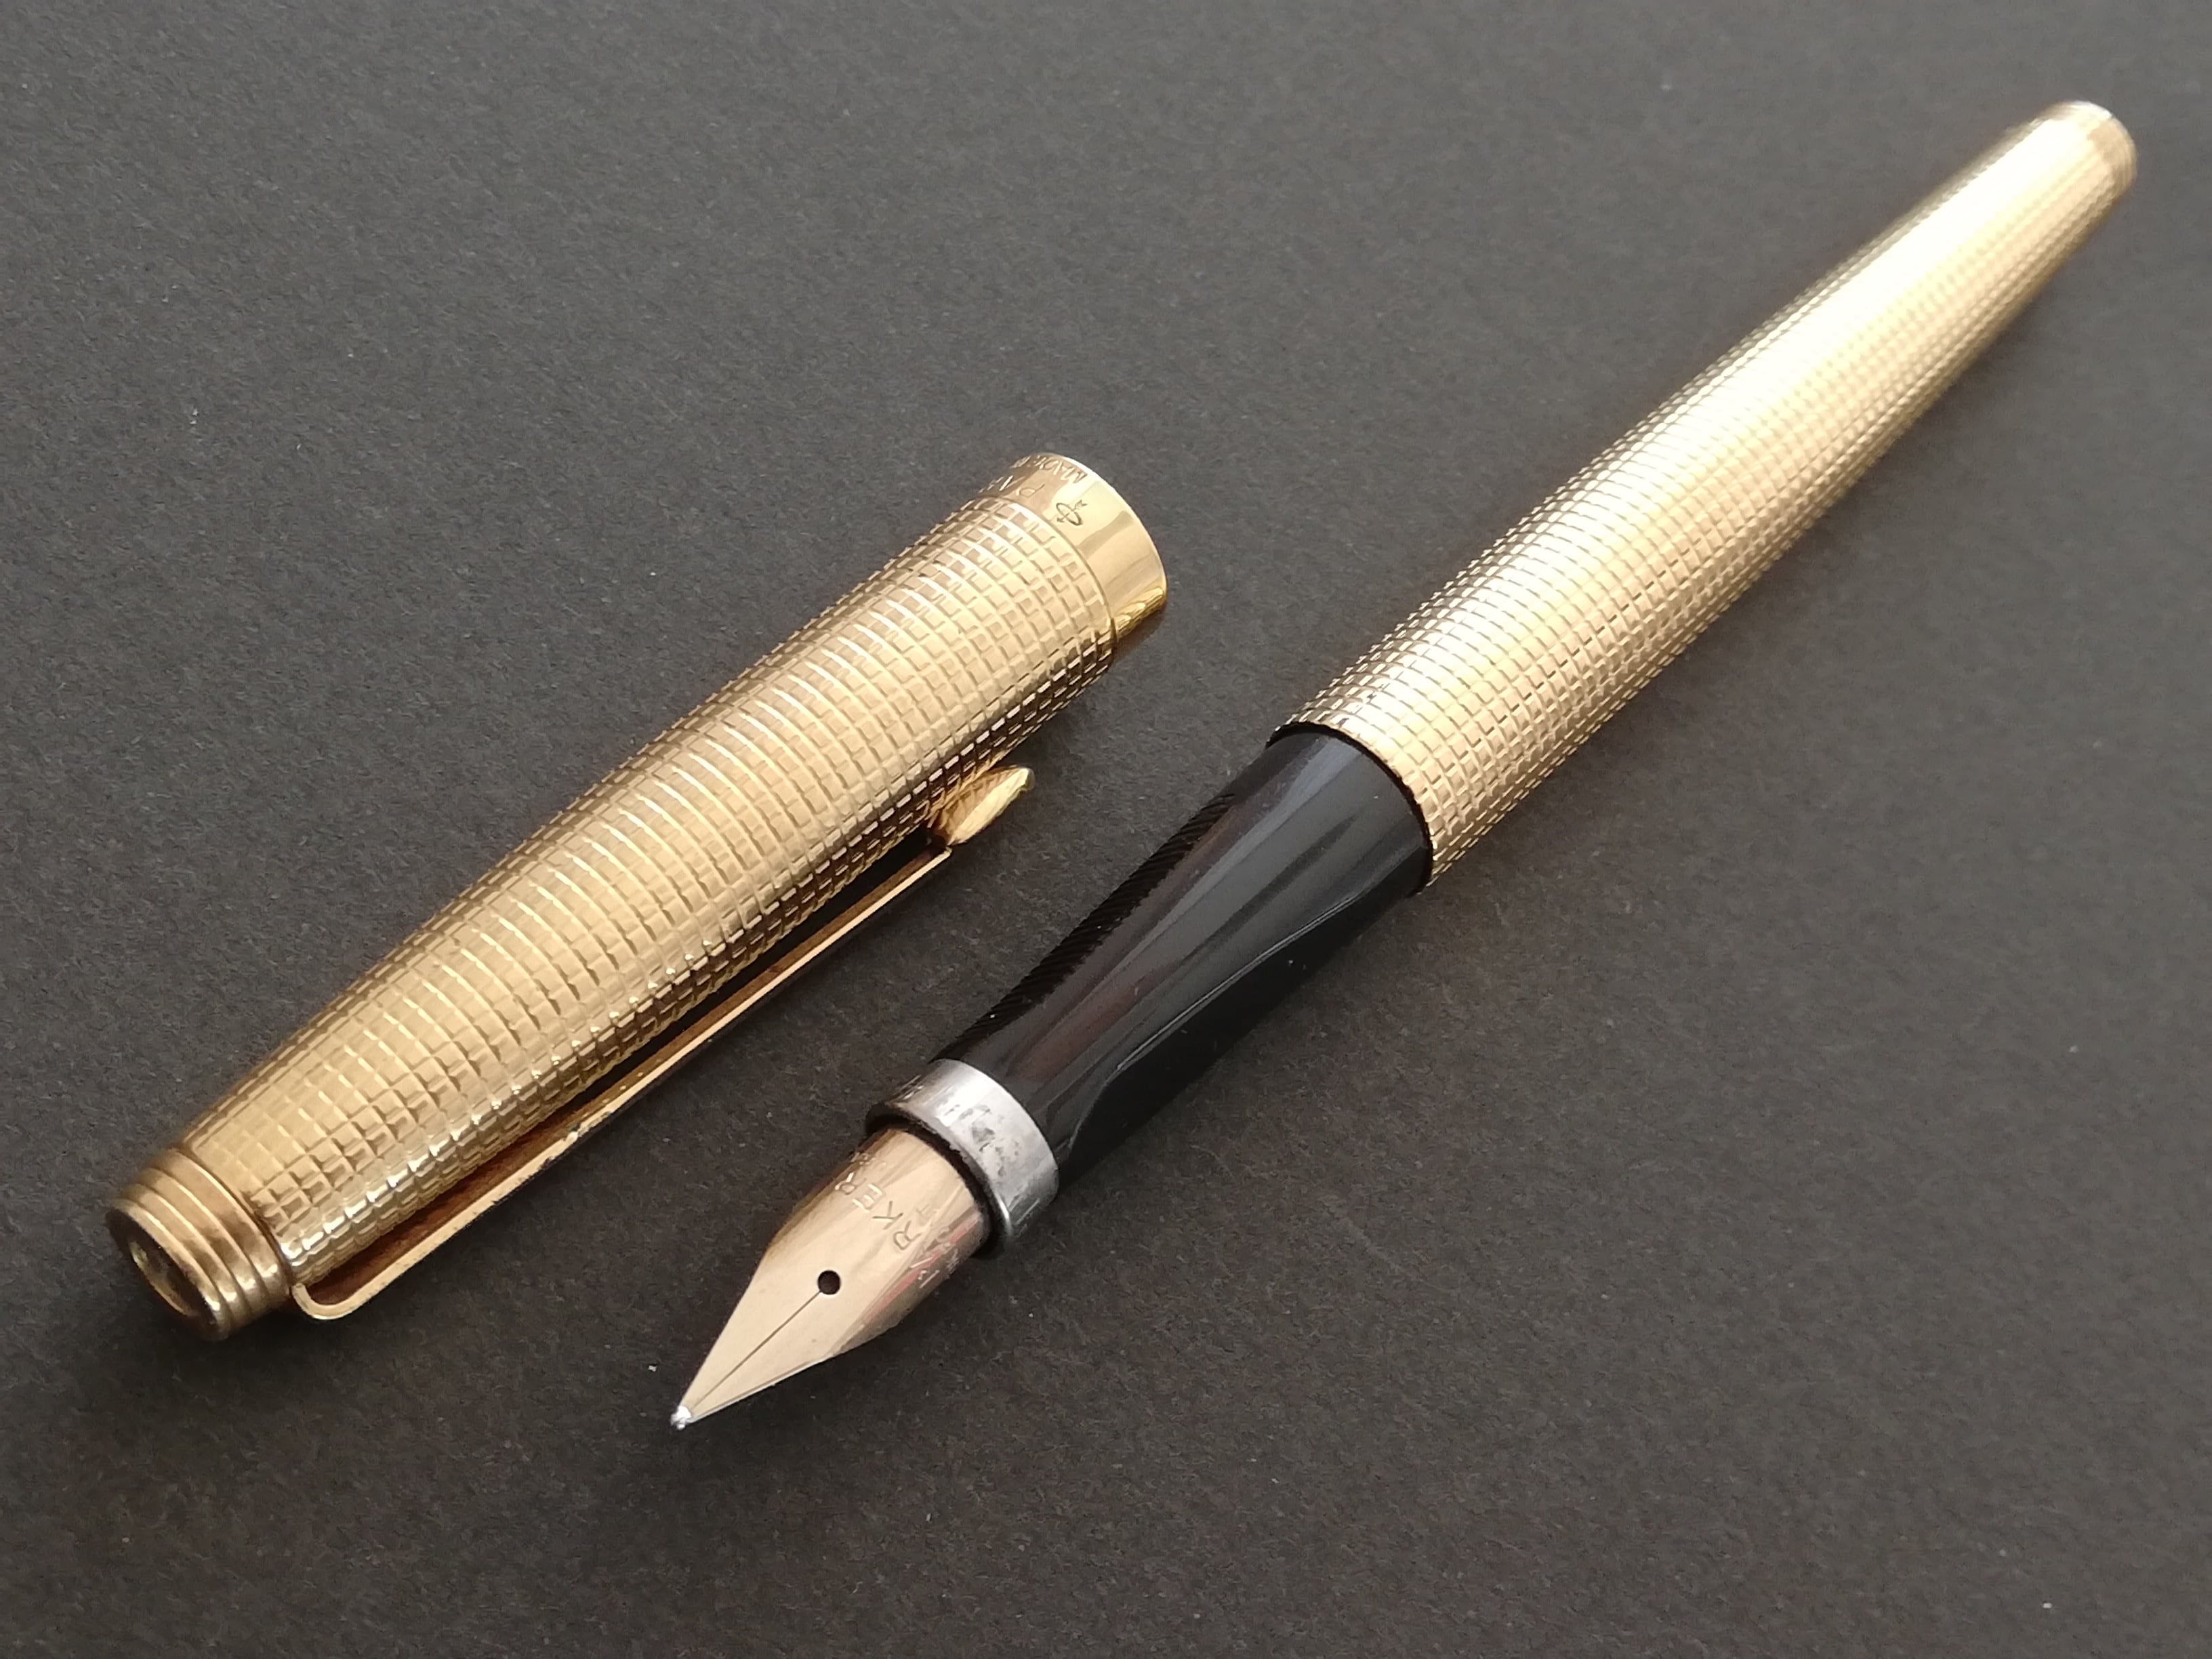 '70s　パーカー ７５ インシグニア　PARKER 75 Insignia　（細字）　14K　　　　　01885 | 川口明弘の調整万年筆  powered by BASE